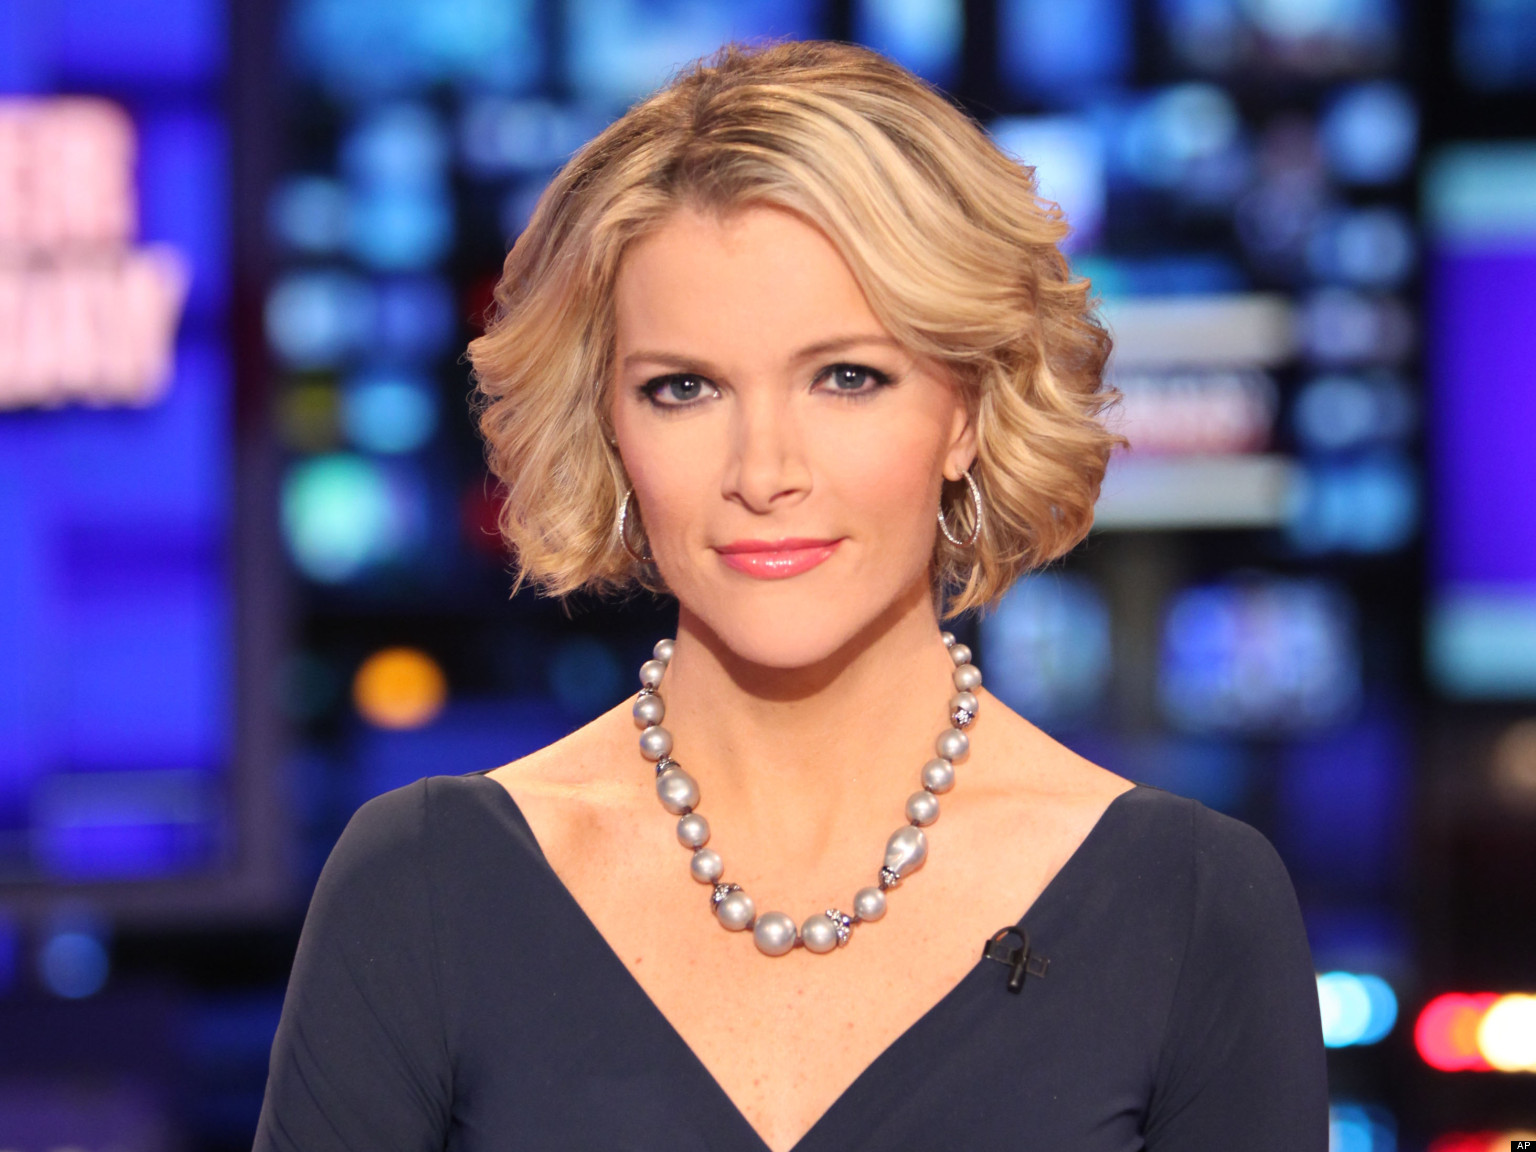 In this March 6, 2012 file photo provided by Fox News, Fox News anchor Megyn Kelly poses at the anchor desk at the Fox studios in New York. (Photo Credit: AP/Fox News, Alex Kroke)